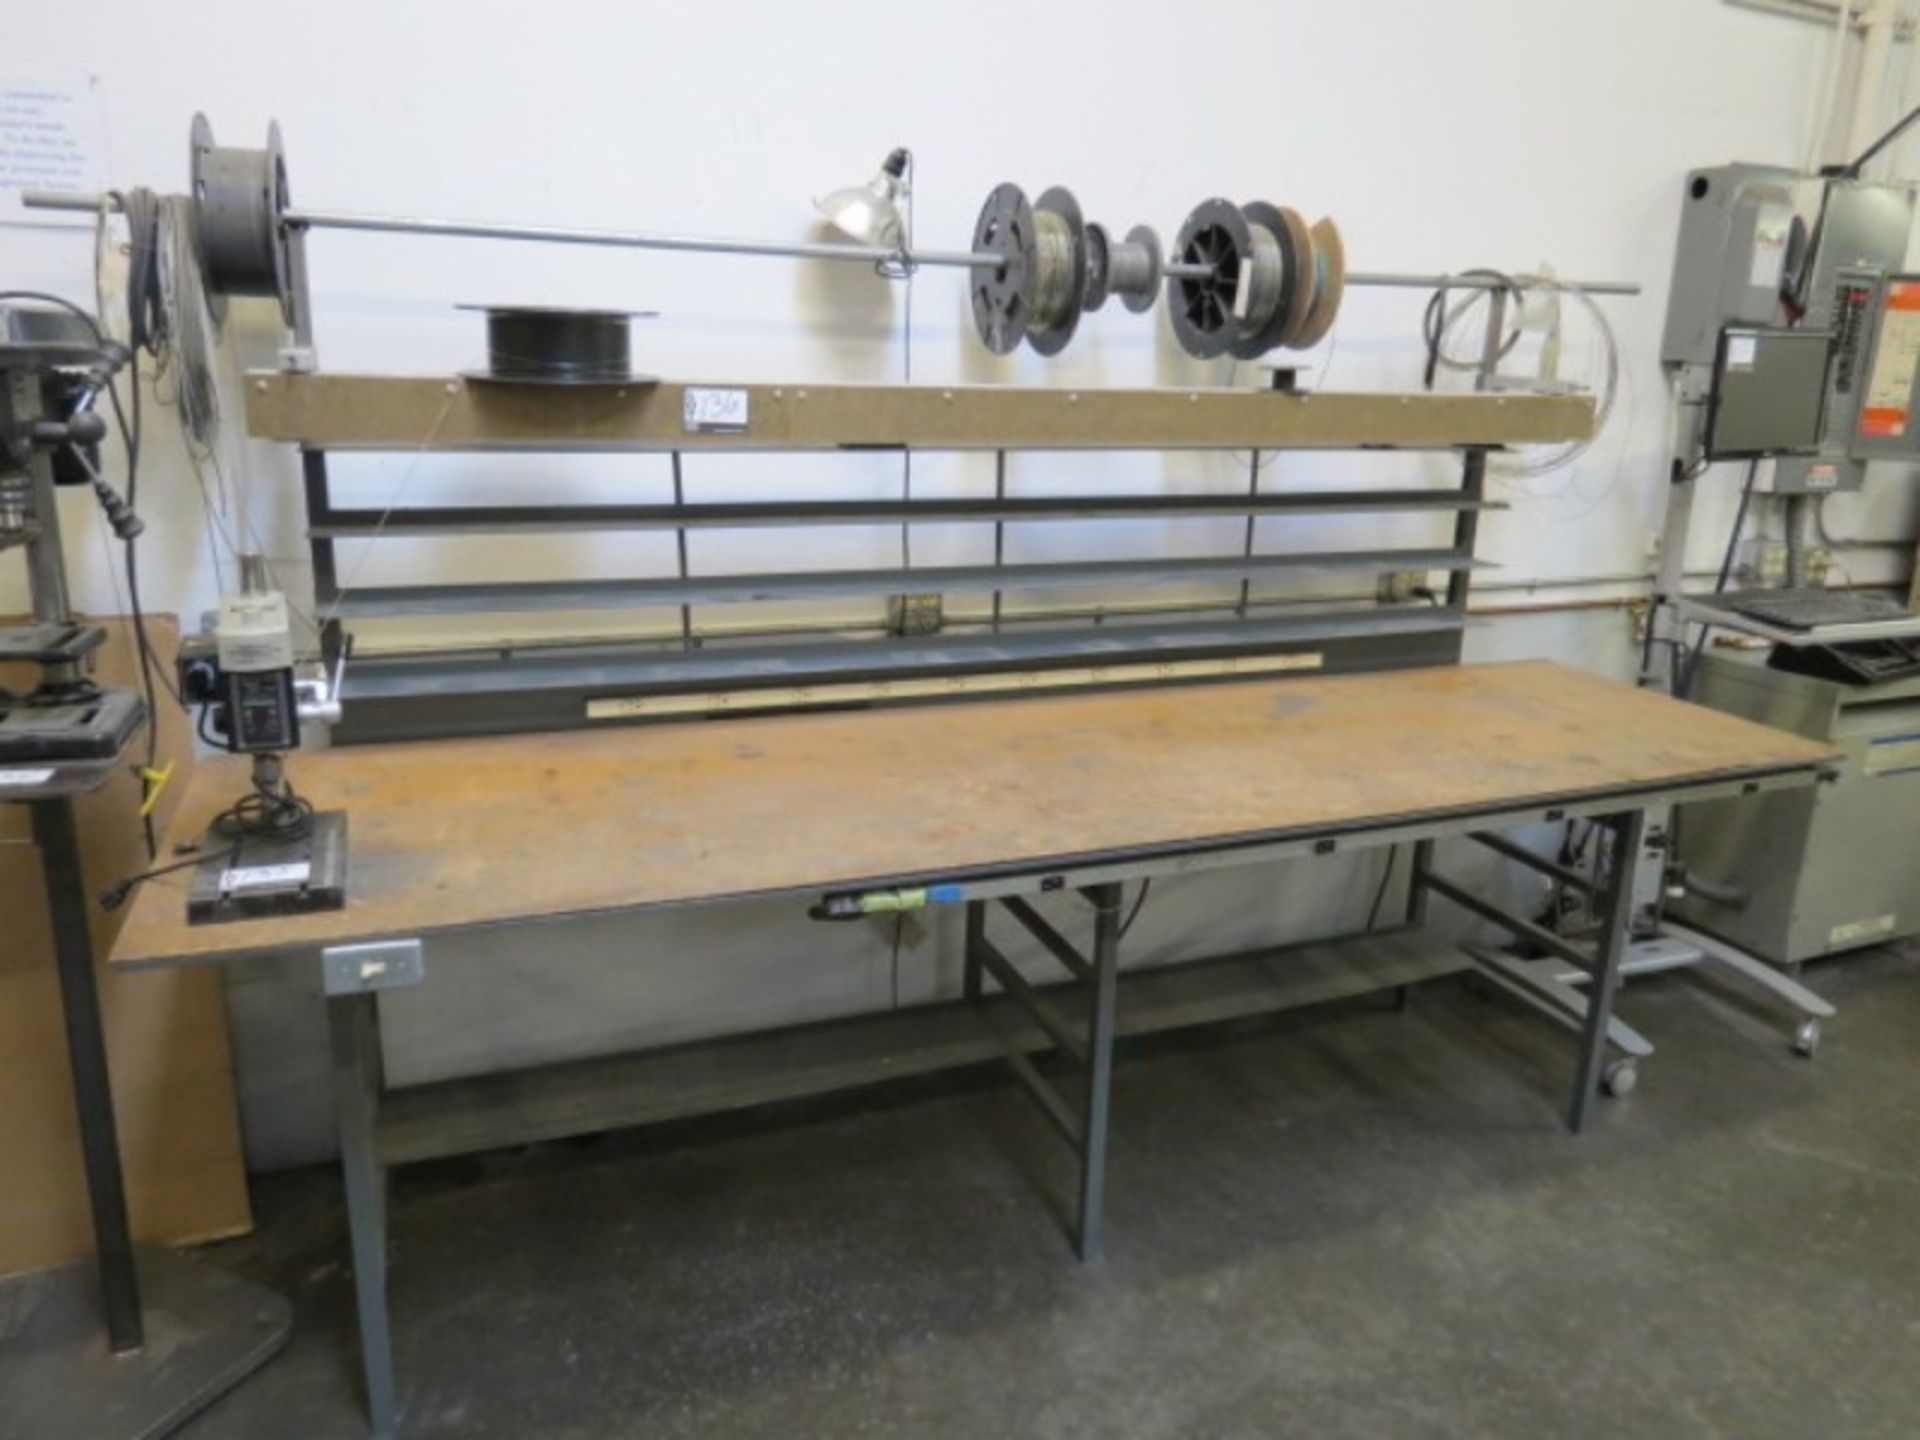 Metal Work Bench with Electrical Strips